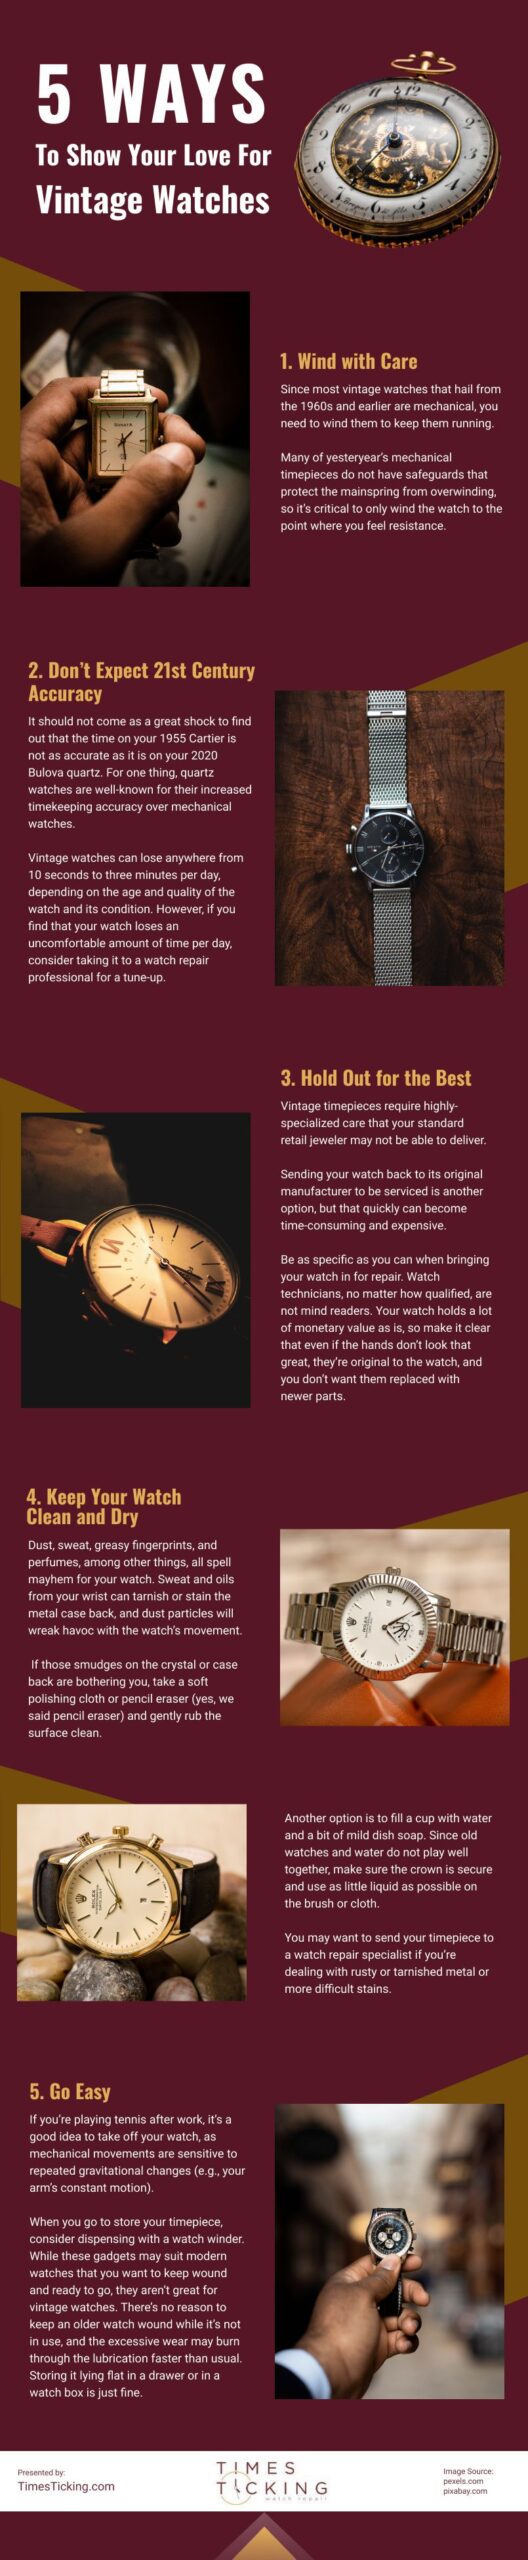 5 Ways To Show Your Love For Vintage Watches Infographic